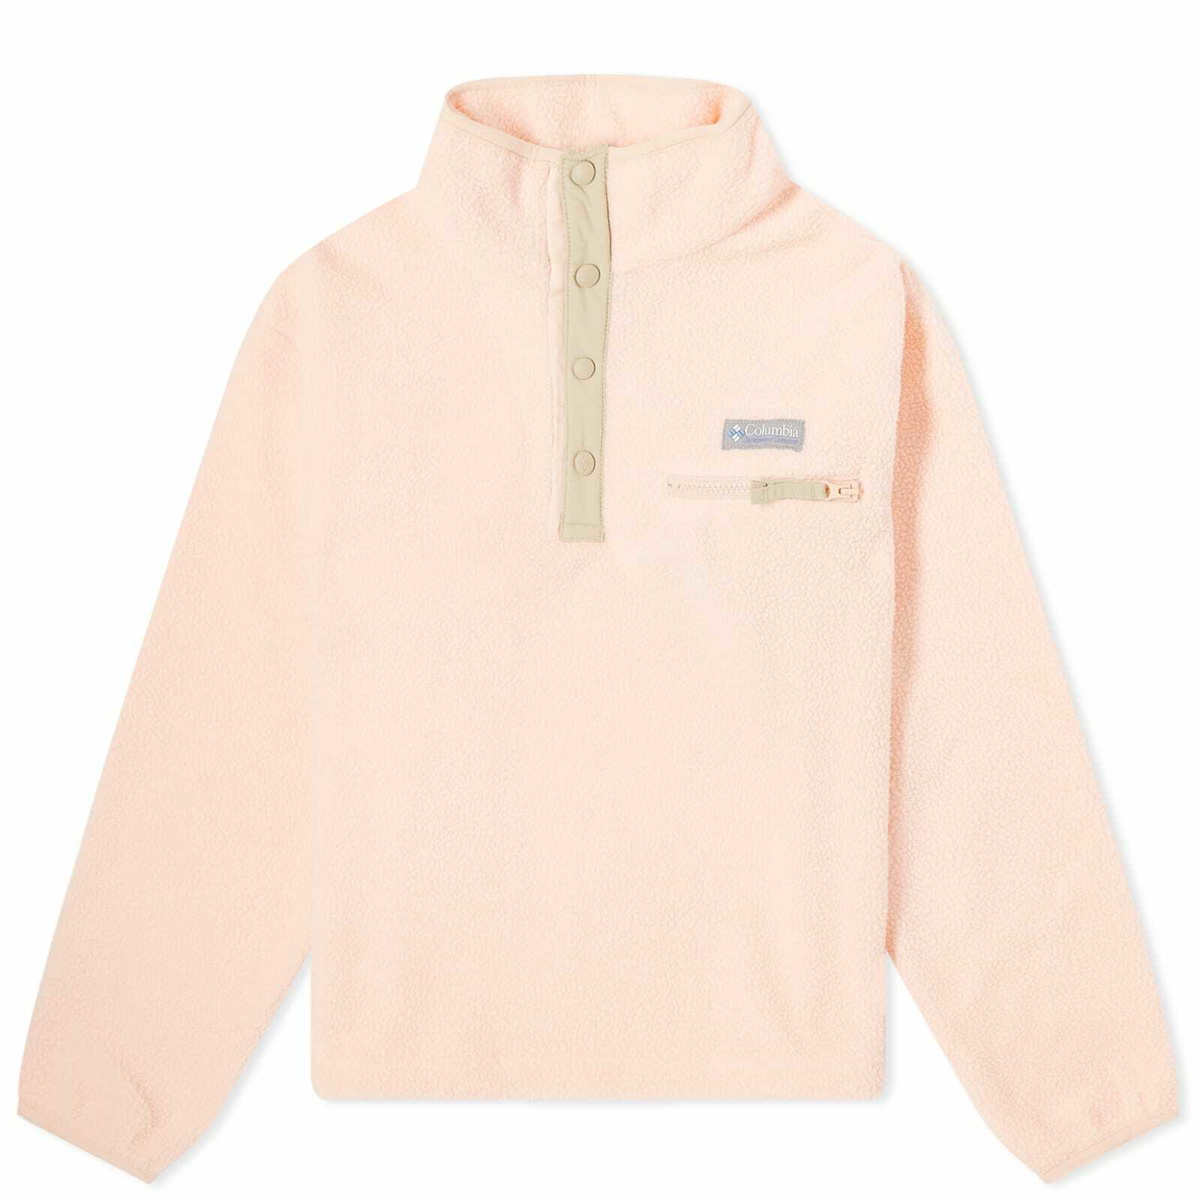 Columbia Women's Back Bowl Fleece in Peach Blossom/Ancient Fossil Columbia